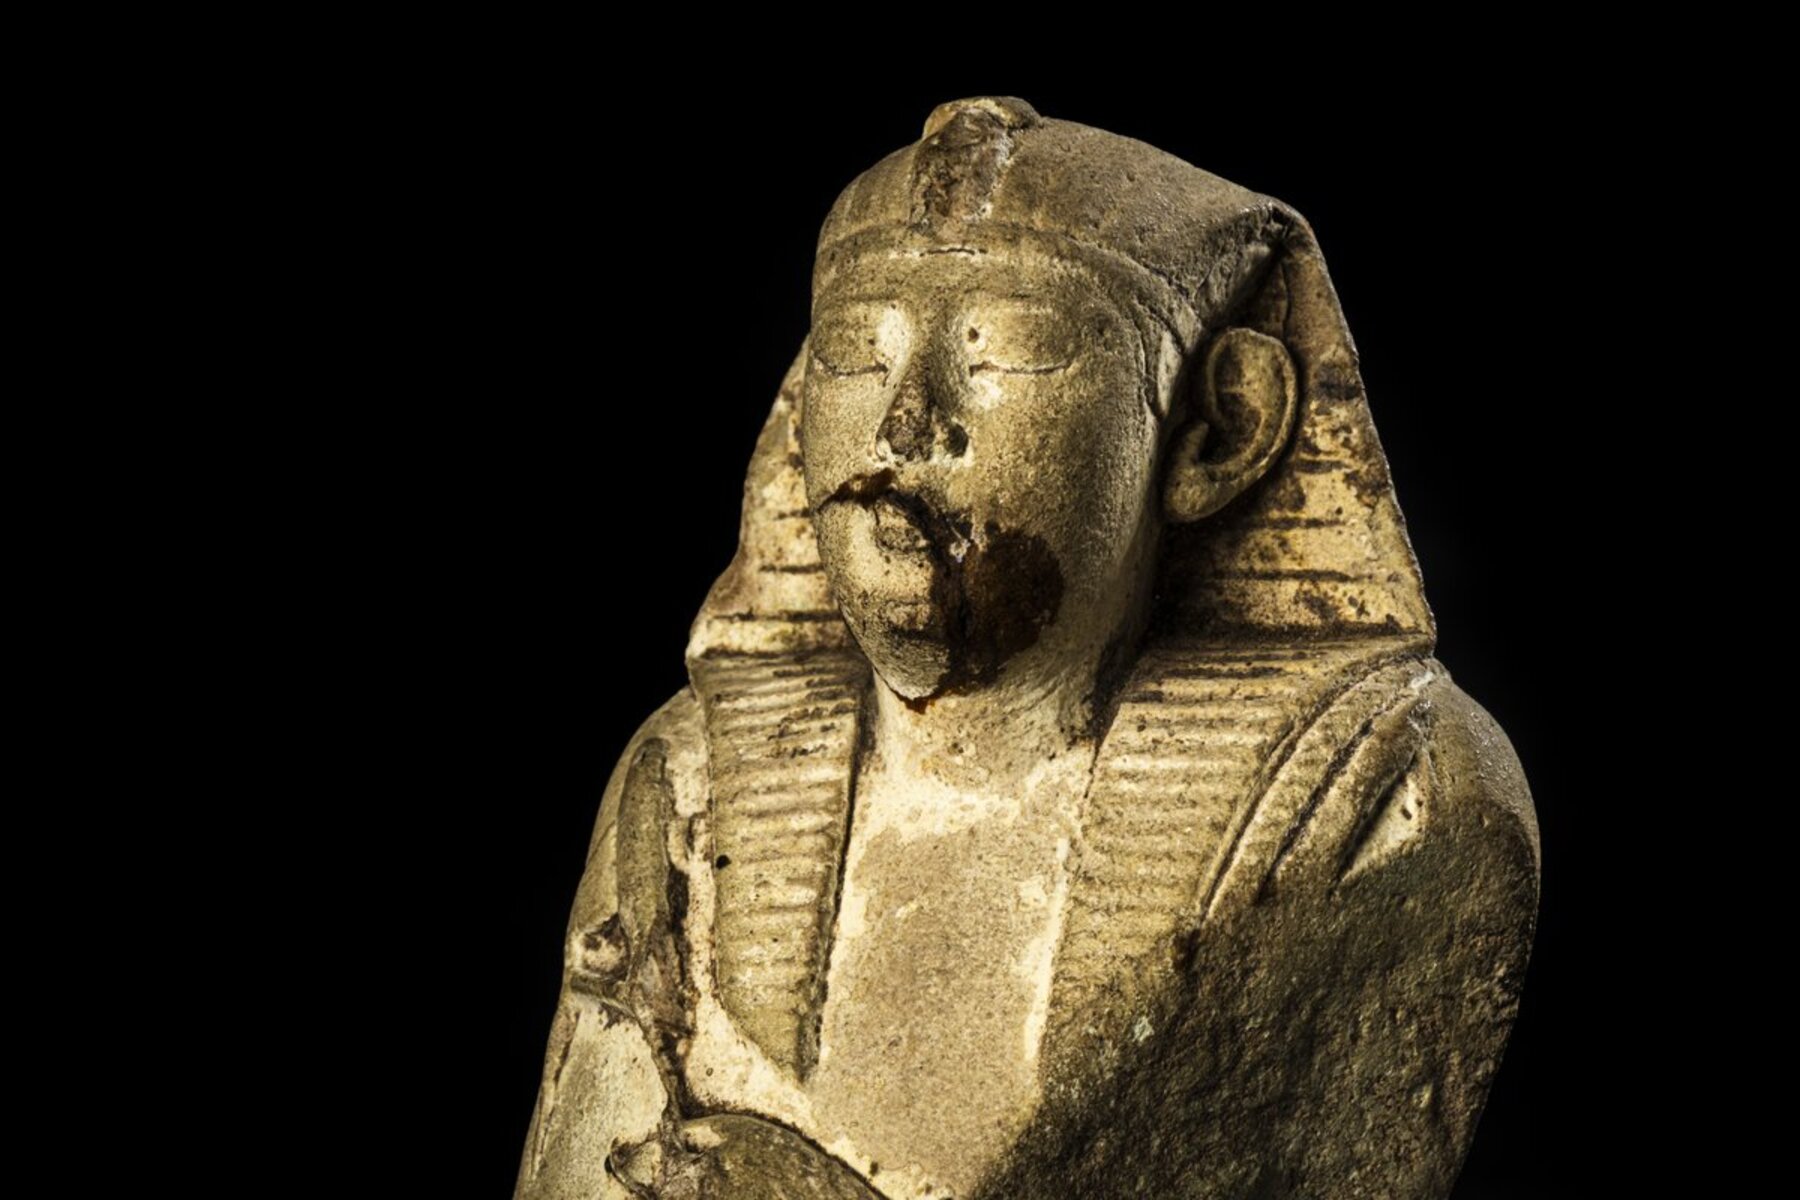 What Was The Primary Function Of Sculpture In Ancient Egypt